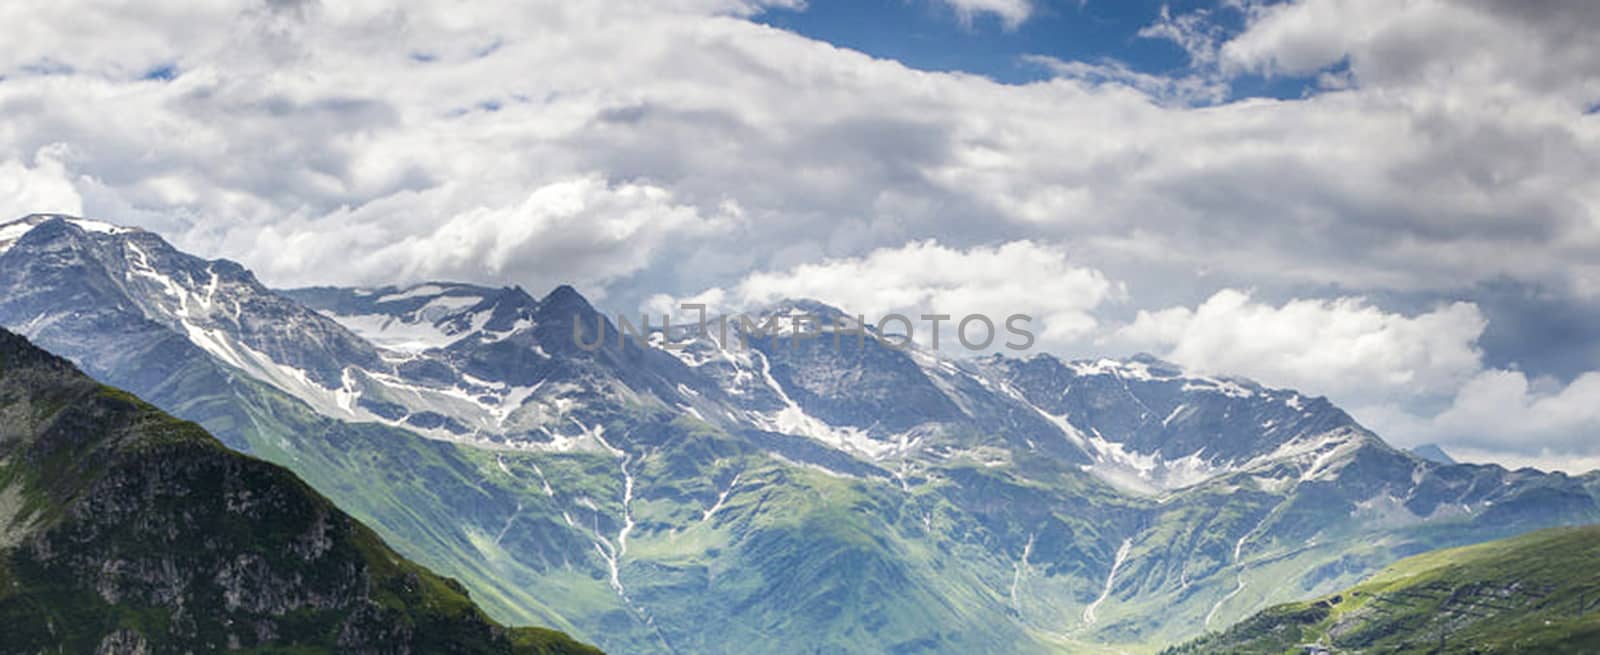 Beautiful pictures of Austria by TravelSync27